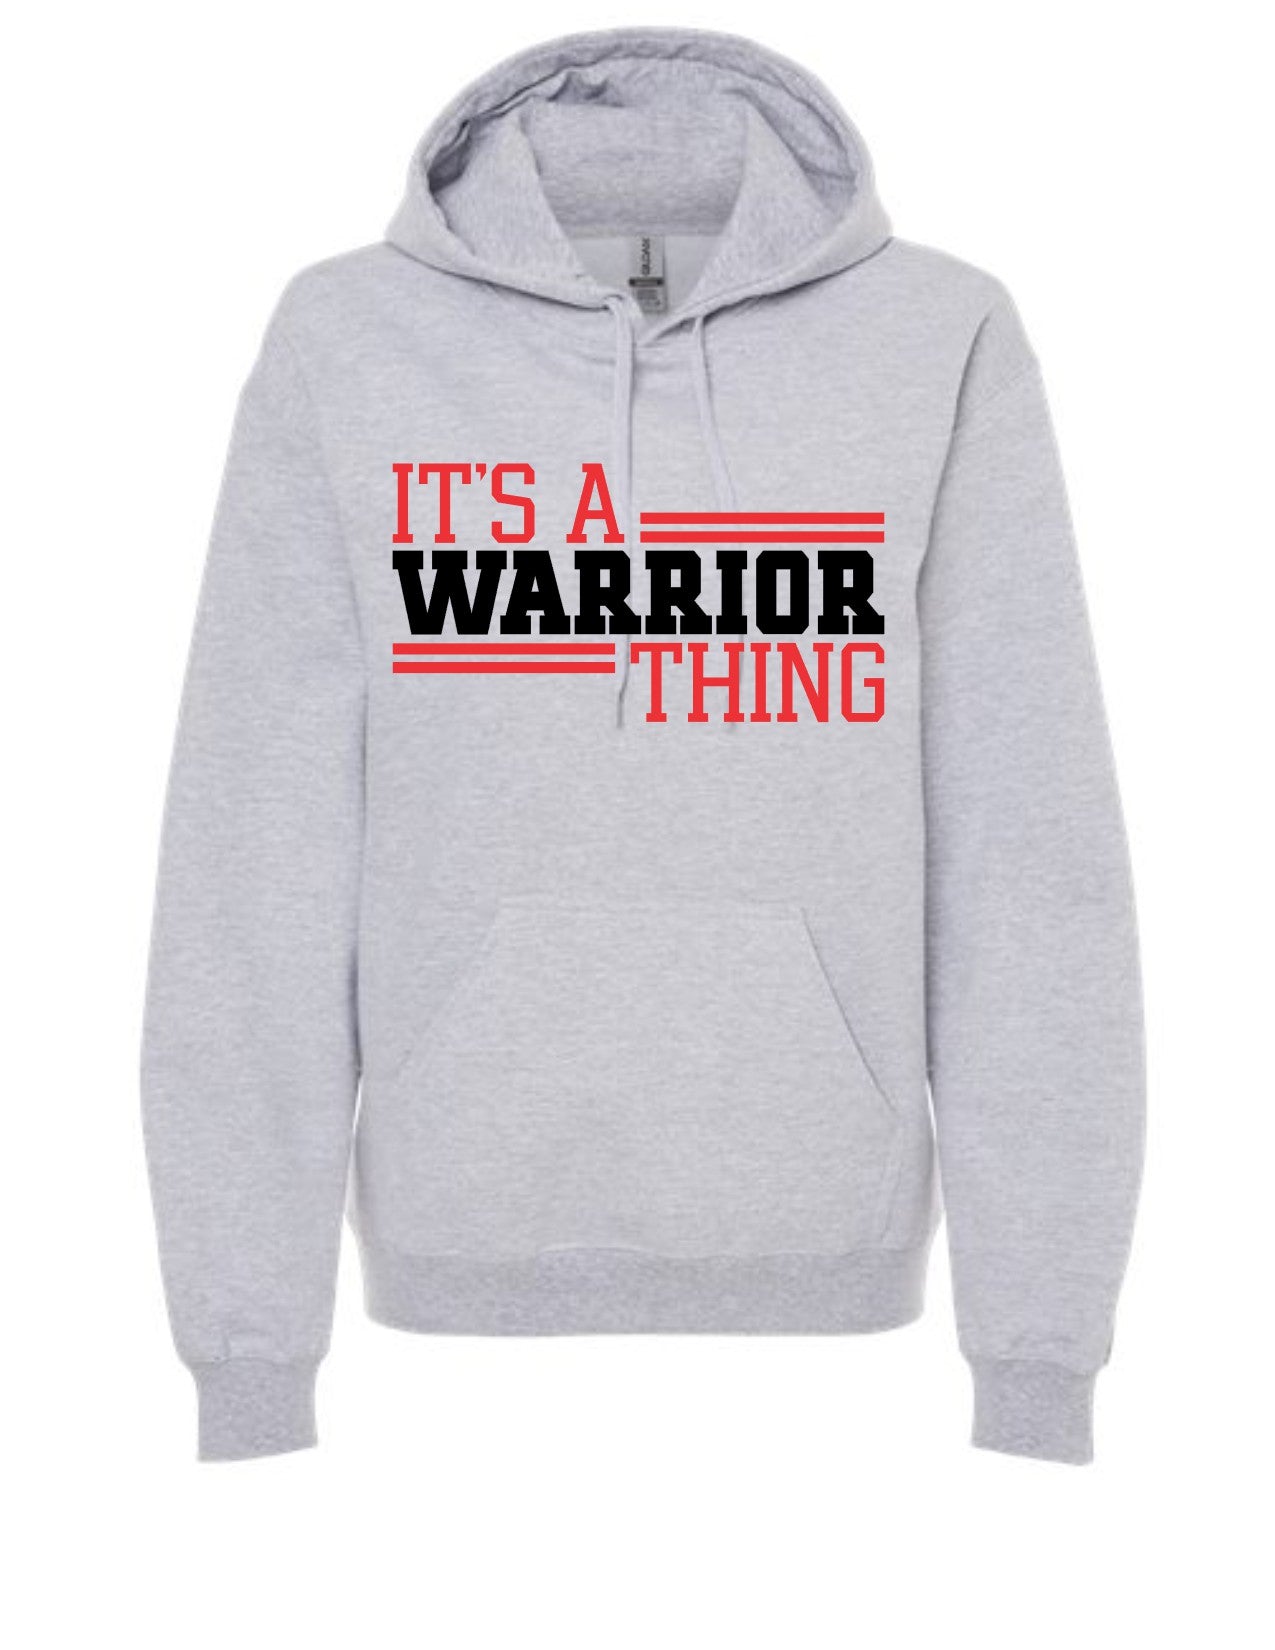 IT'S A WARRIOR THING HOODIE